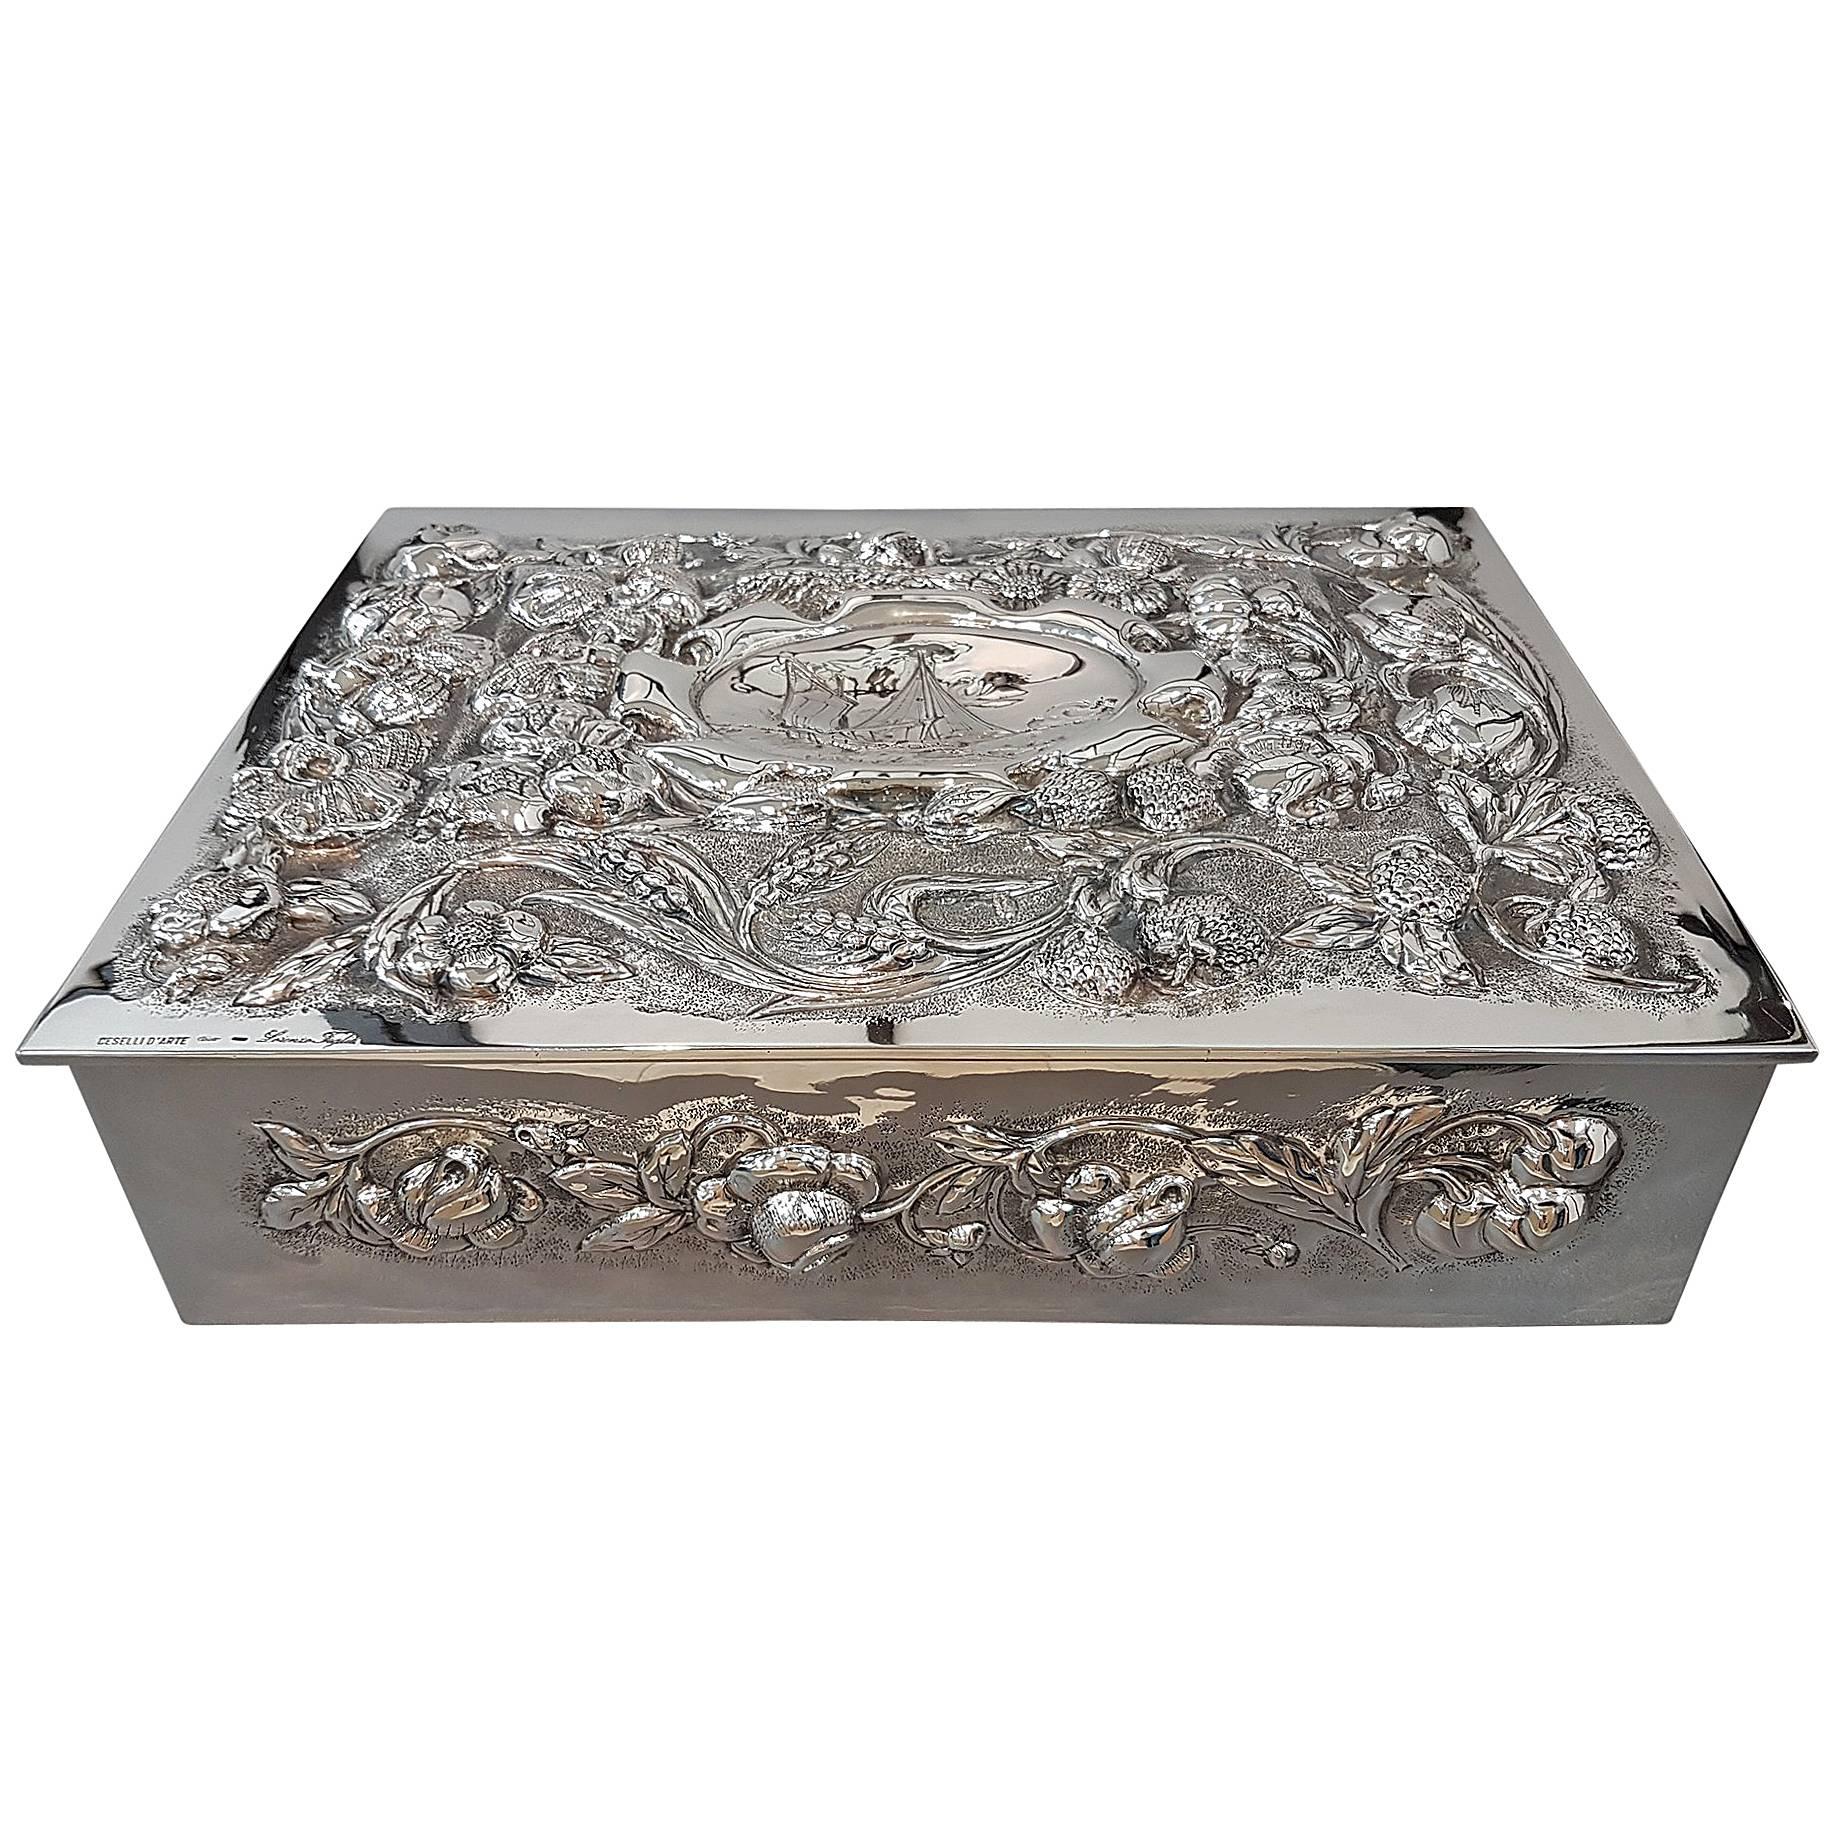 20th Century Italian Solid Silver Table SHIP Box embossed completely by hand